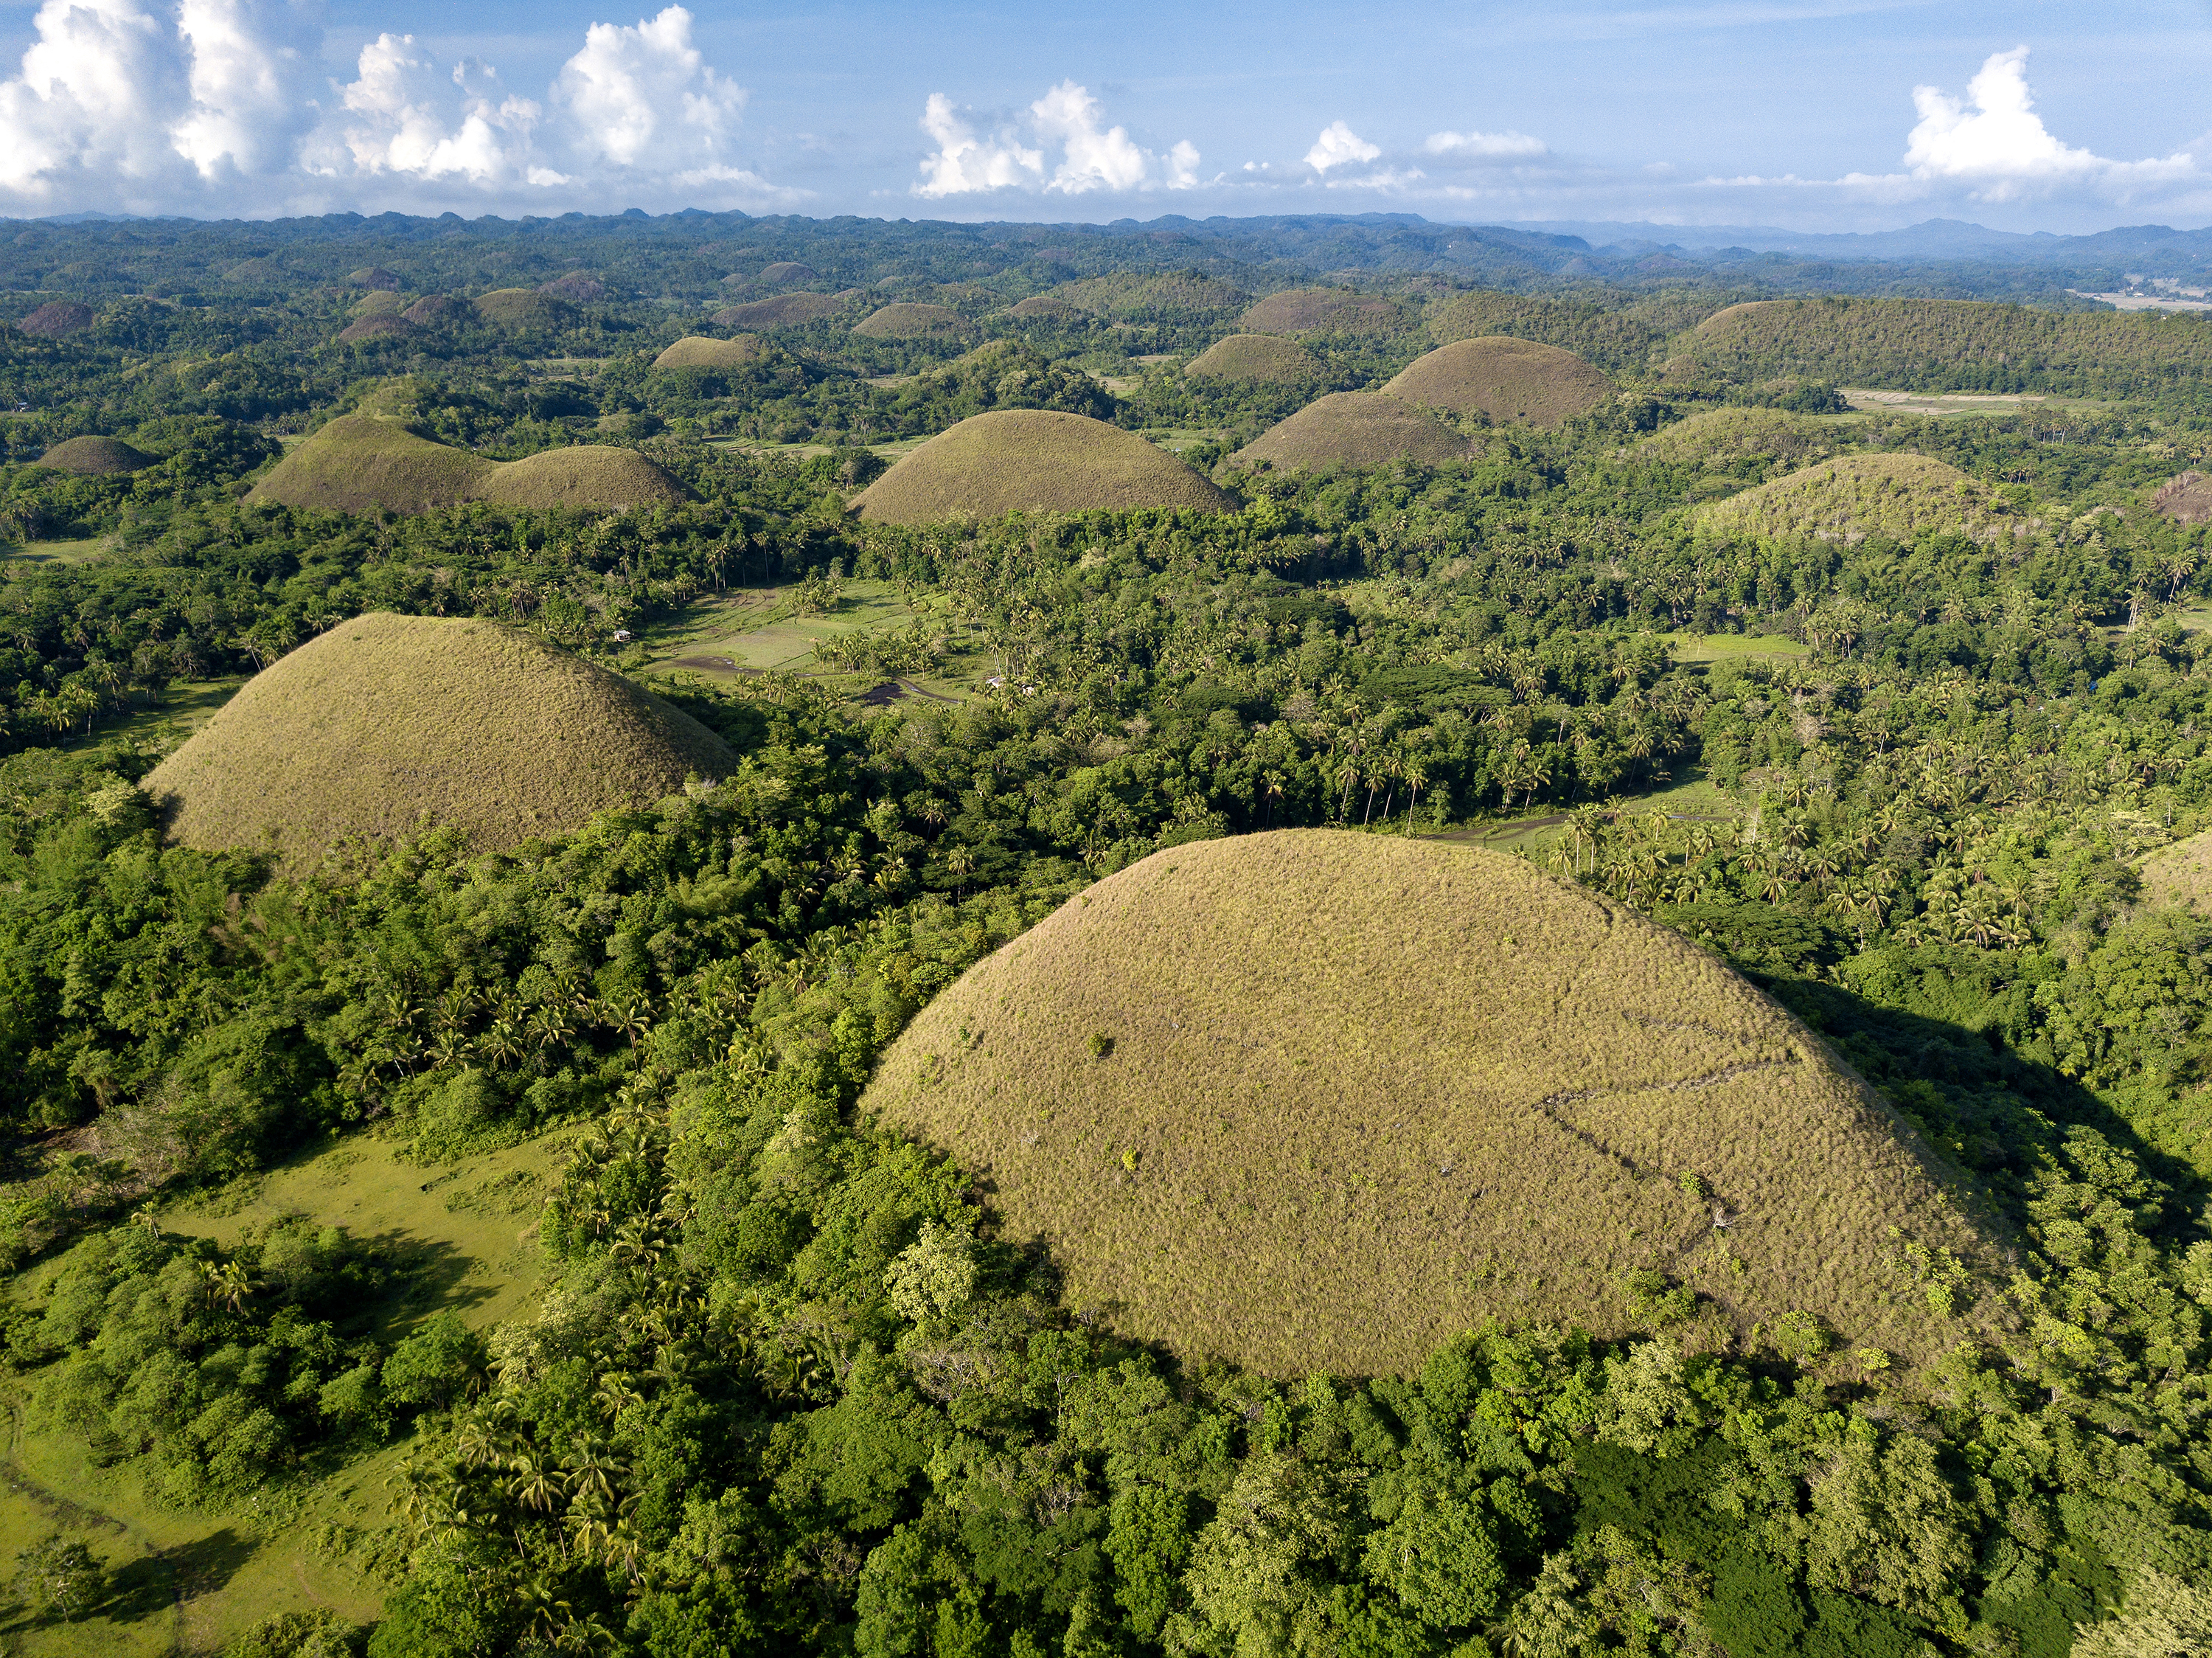 Aerial view of Chocolate Hills in Bohol